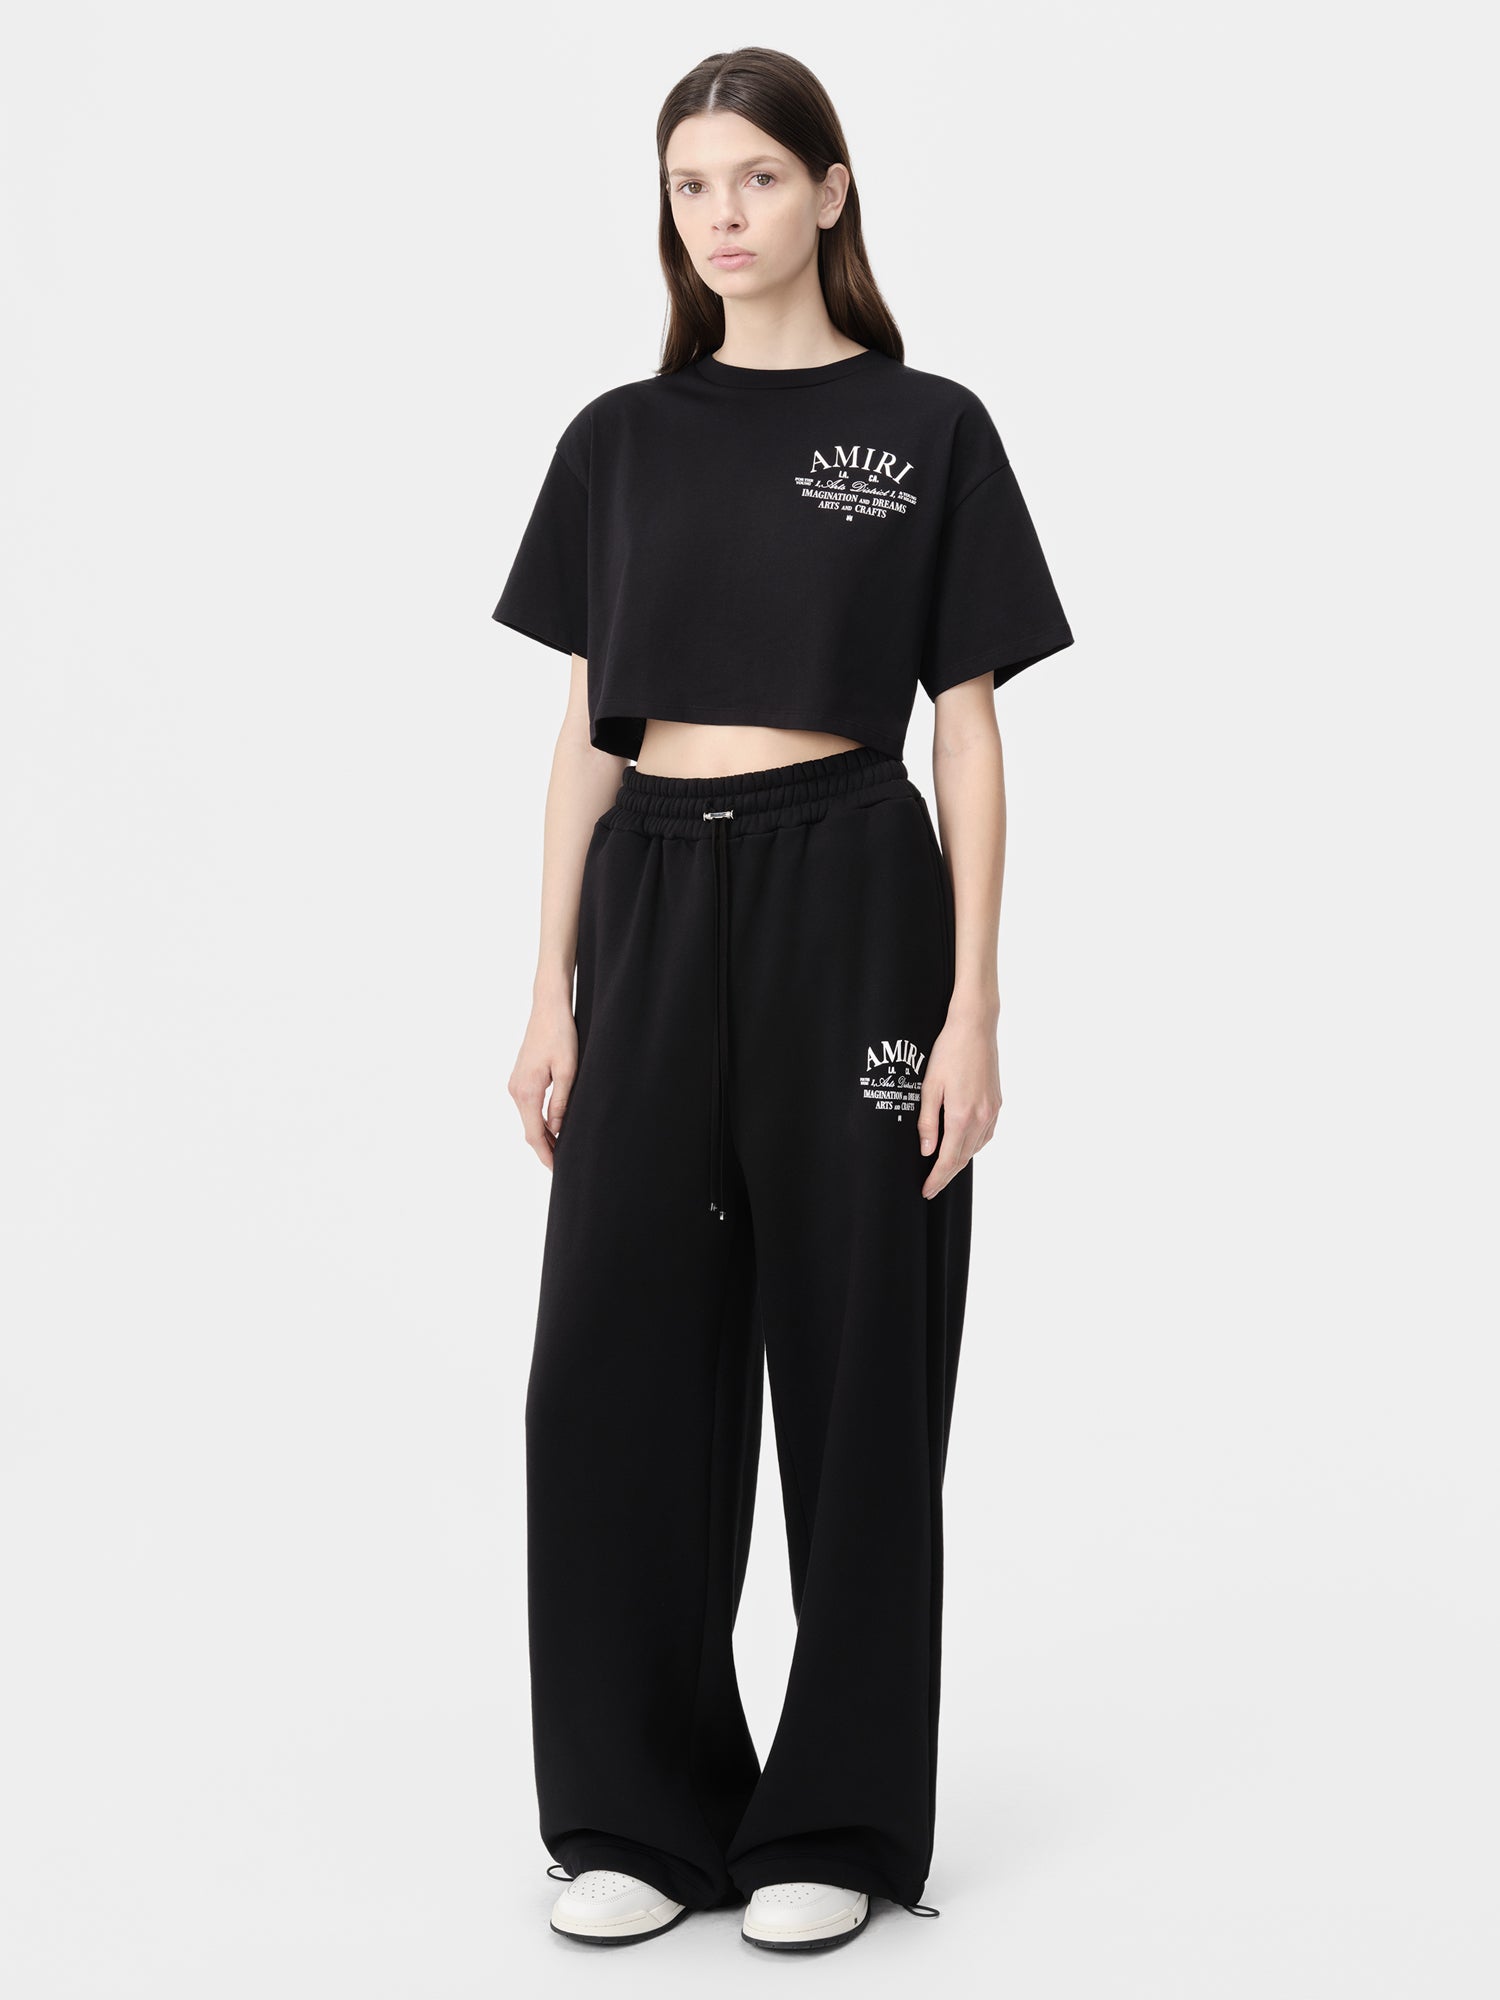 Product WOMEN - WOMEN'S ARTS DISTRICT CROPPED TEE - Black featured image